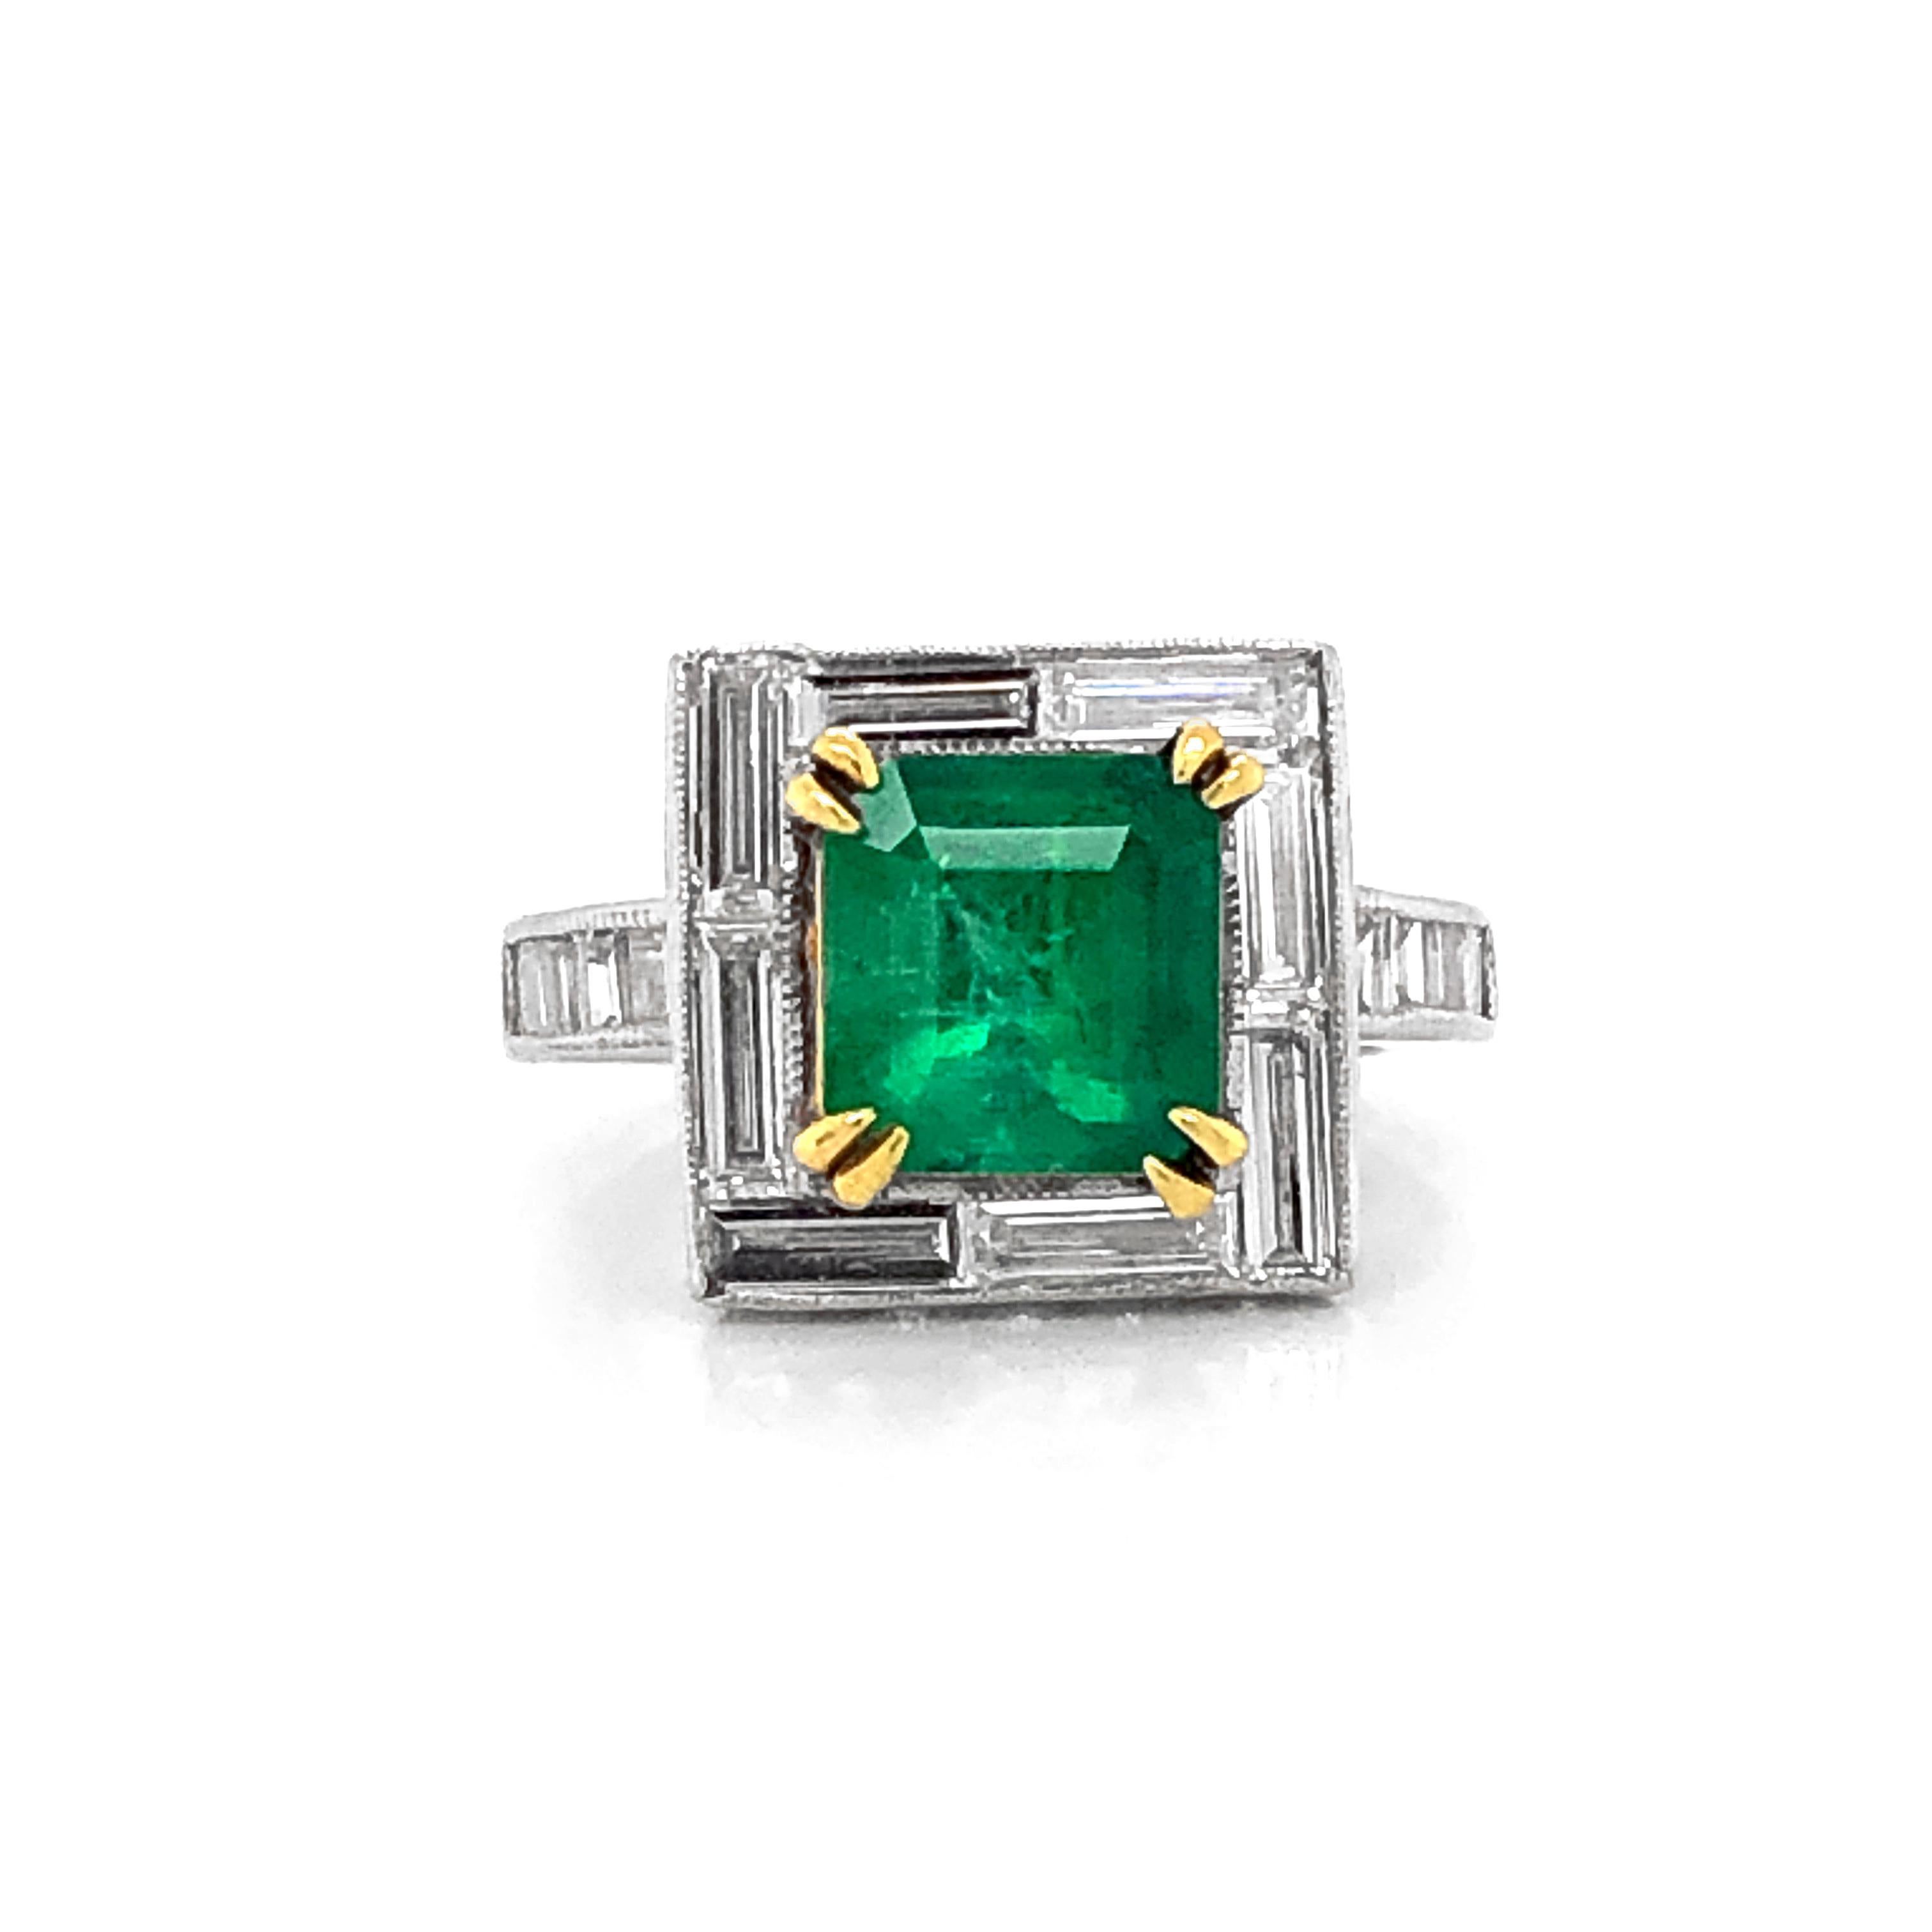 This beautiful certified cocktail ring is crowned with a brilliant cushion cut emerald 2.28 ct stone from Columbia.
GIA certified.
Accented with round and baguette cut diamonds 2.65 ct.
Platinum 950 metal.
Width: 1.2 cm
Height: 1.2 cm
Depth: 0.8